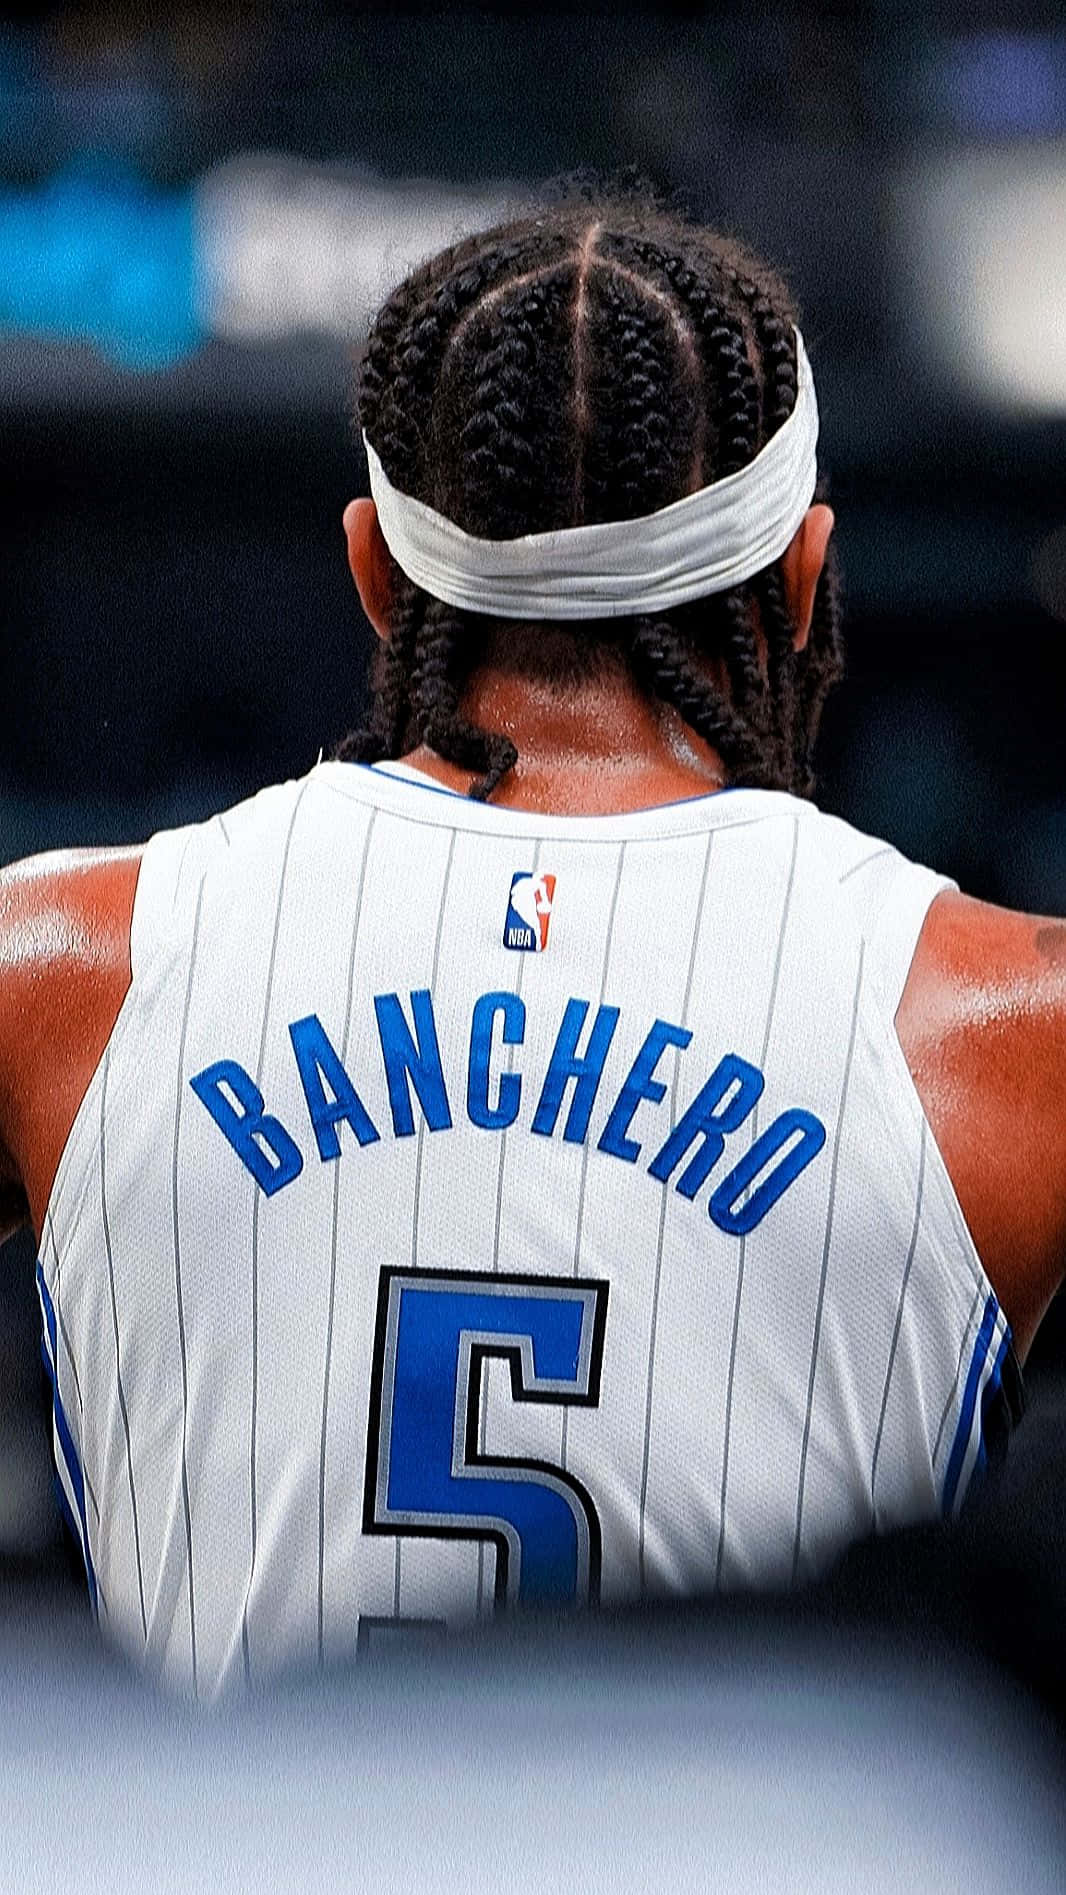 Paolo Banchero Basketball Jersey Number5 Wallpaper